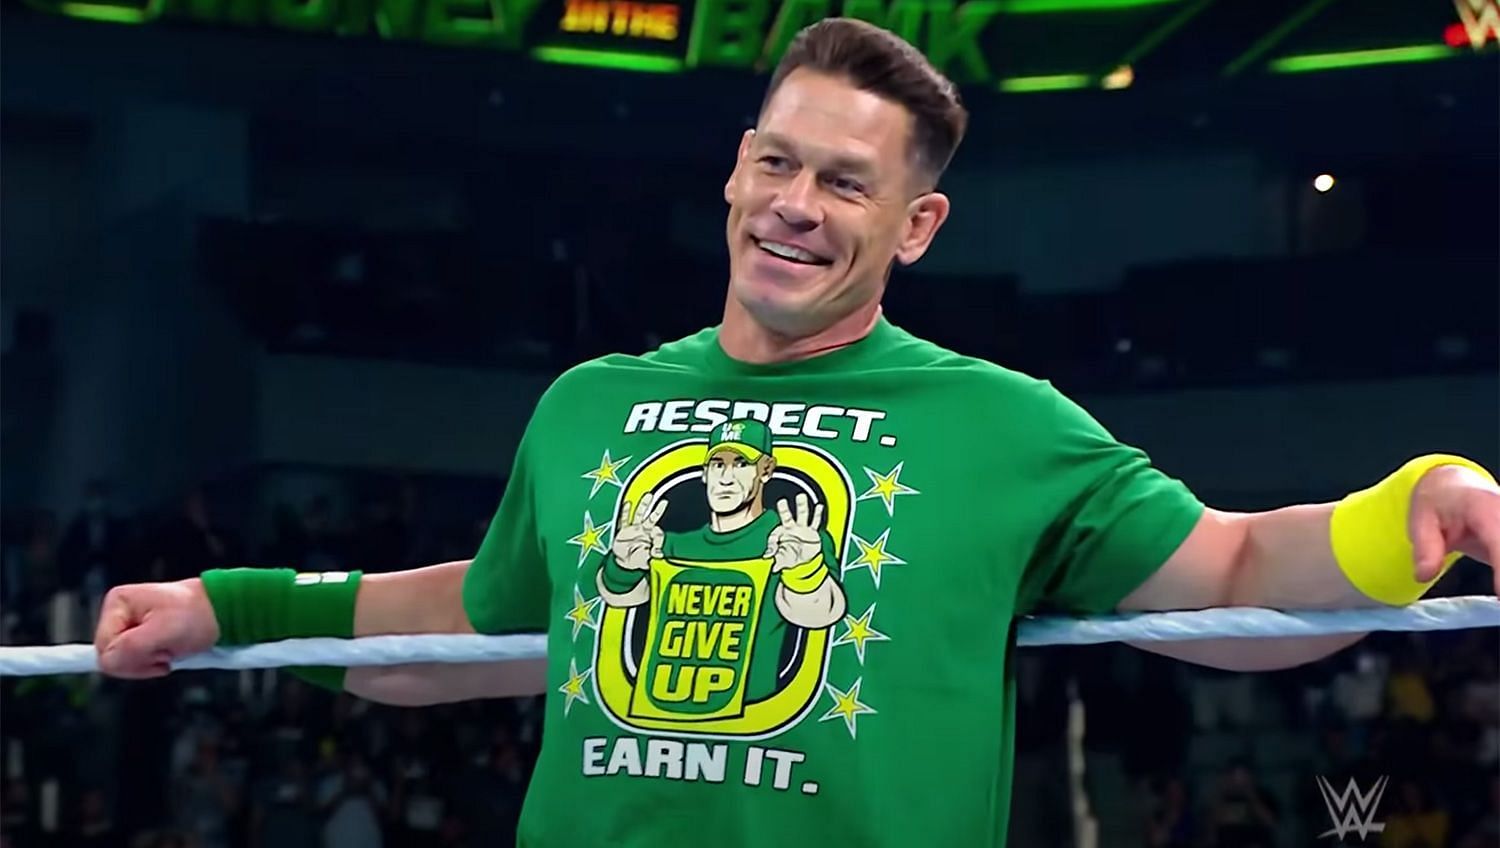 Is Cena on his way back to WWE sooner rather than later?